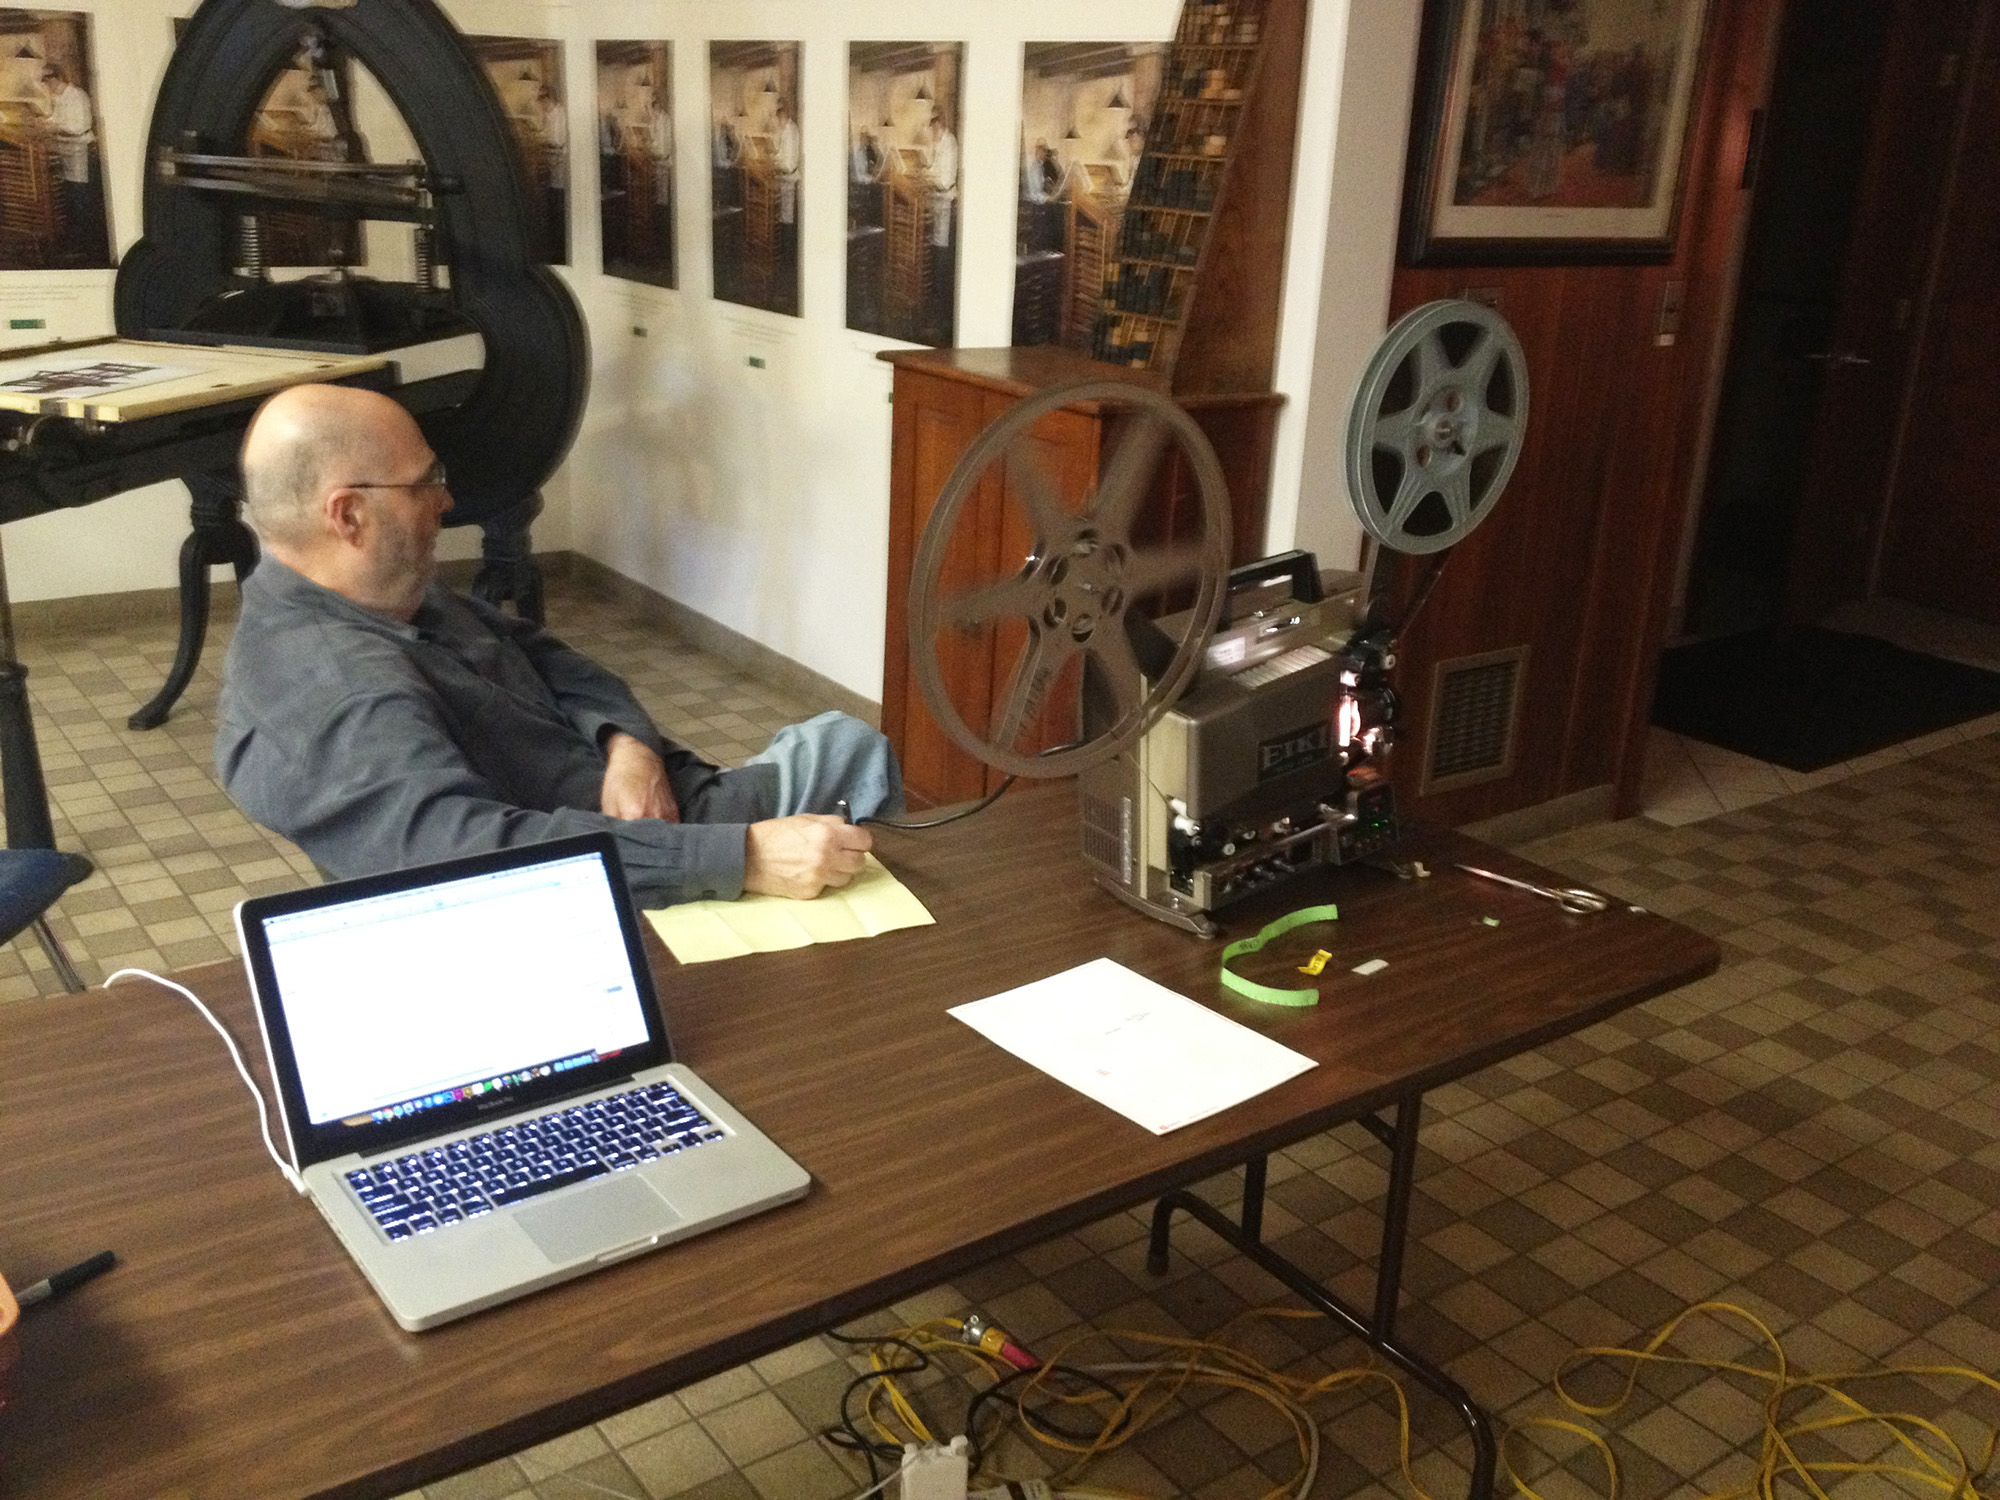 Screening the Schlesinger films with Frank Romano at the Museum of Printing in early 2013. If I remember right, I borrowed a film projector from a local university and flew with it as carry-on luggage ;-)